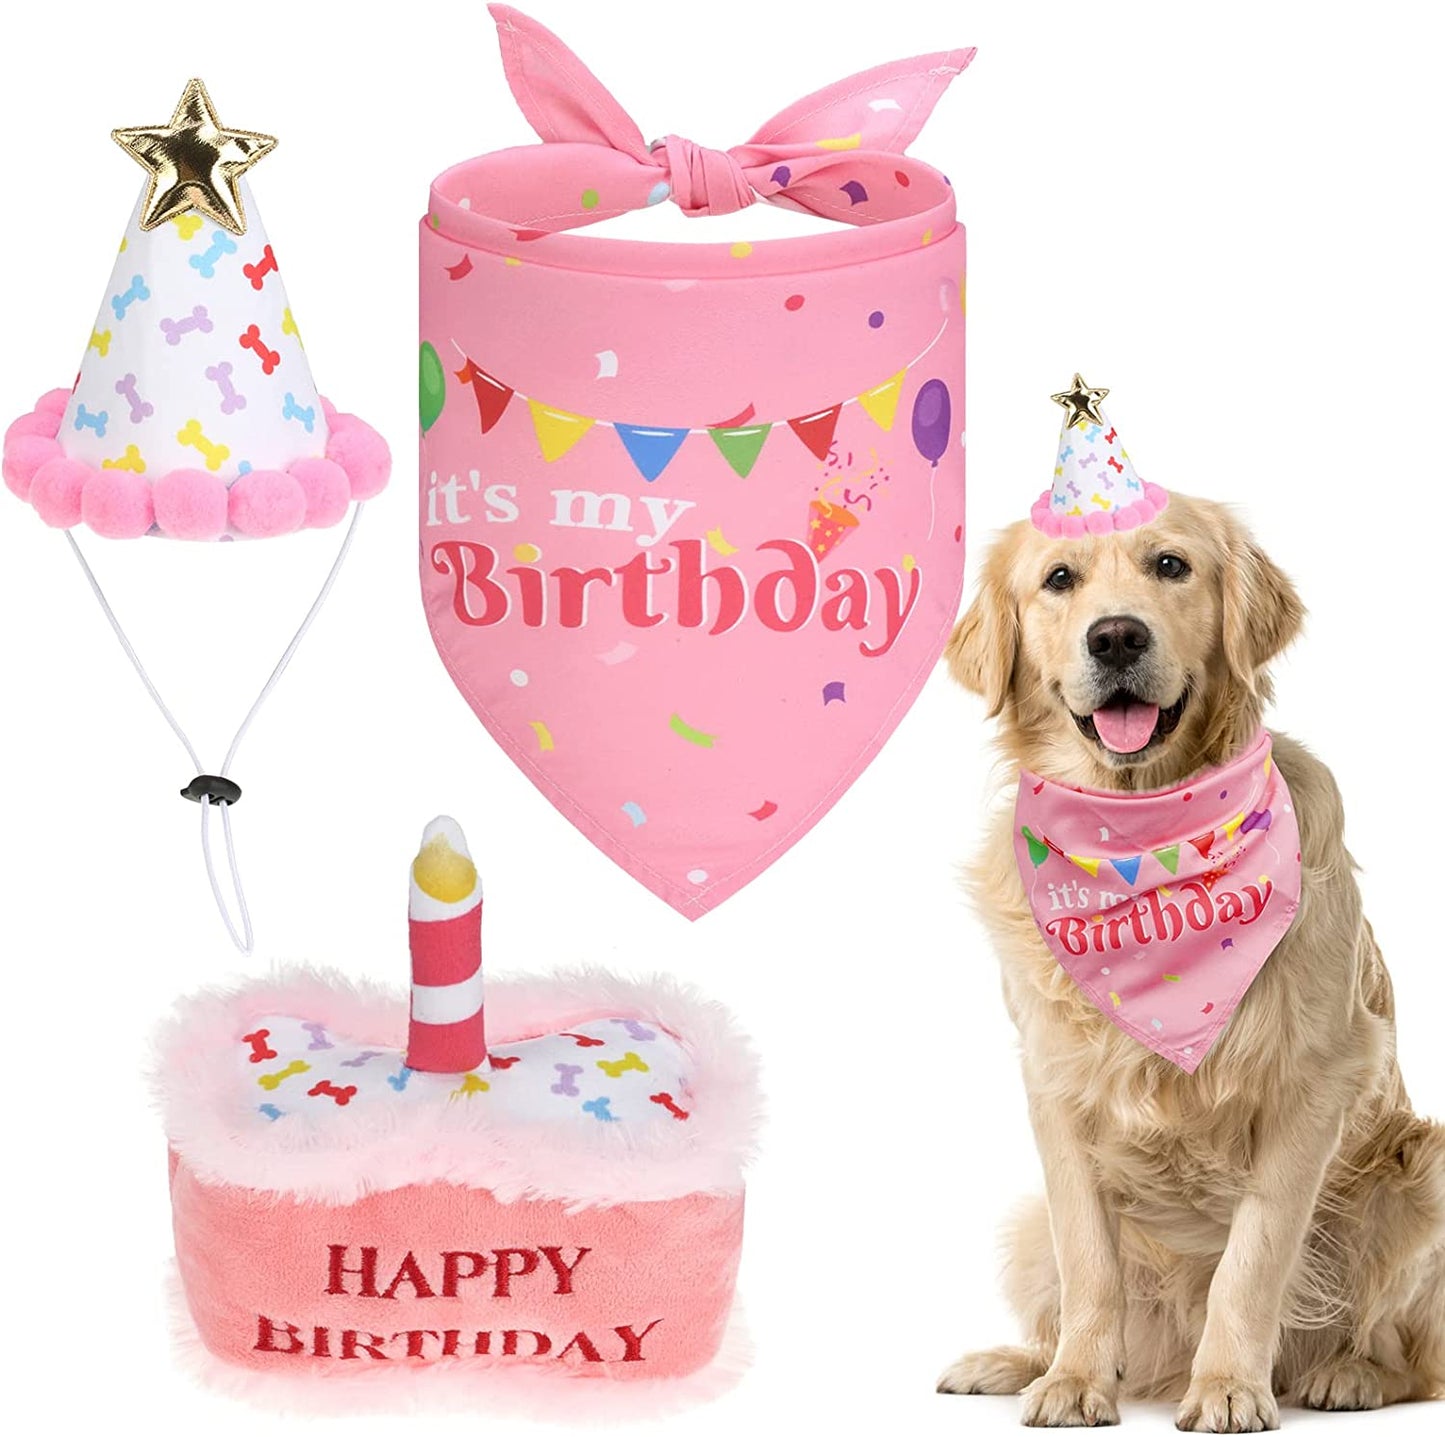 EXPAWLORER Dog Birthday Outfit - Cute Hat Bandana Scarf and Squeaky Cake Dog Toy for Birthday Party Supplies Gift, Great Party Decorations for Small Medium Large Dogs Girl Pink